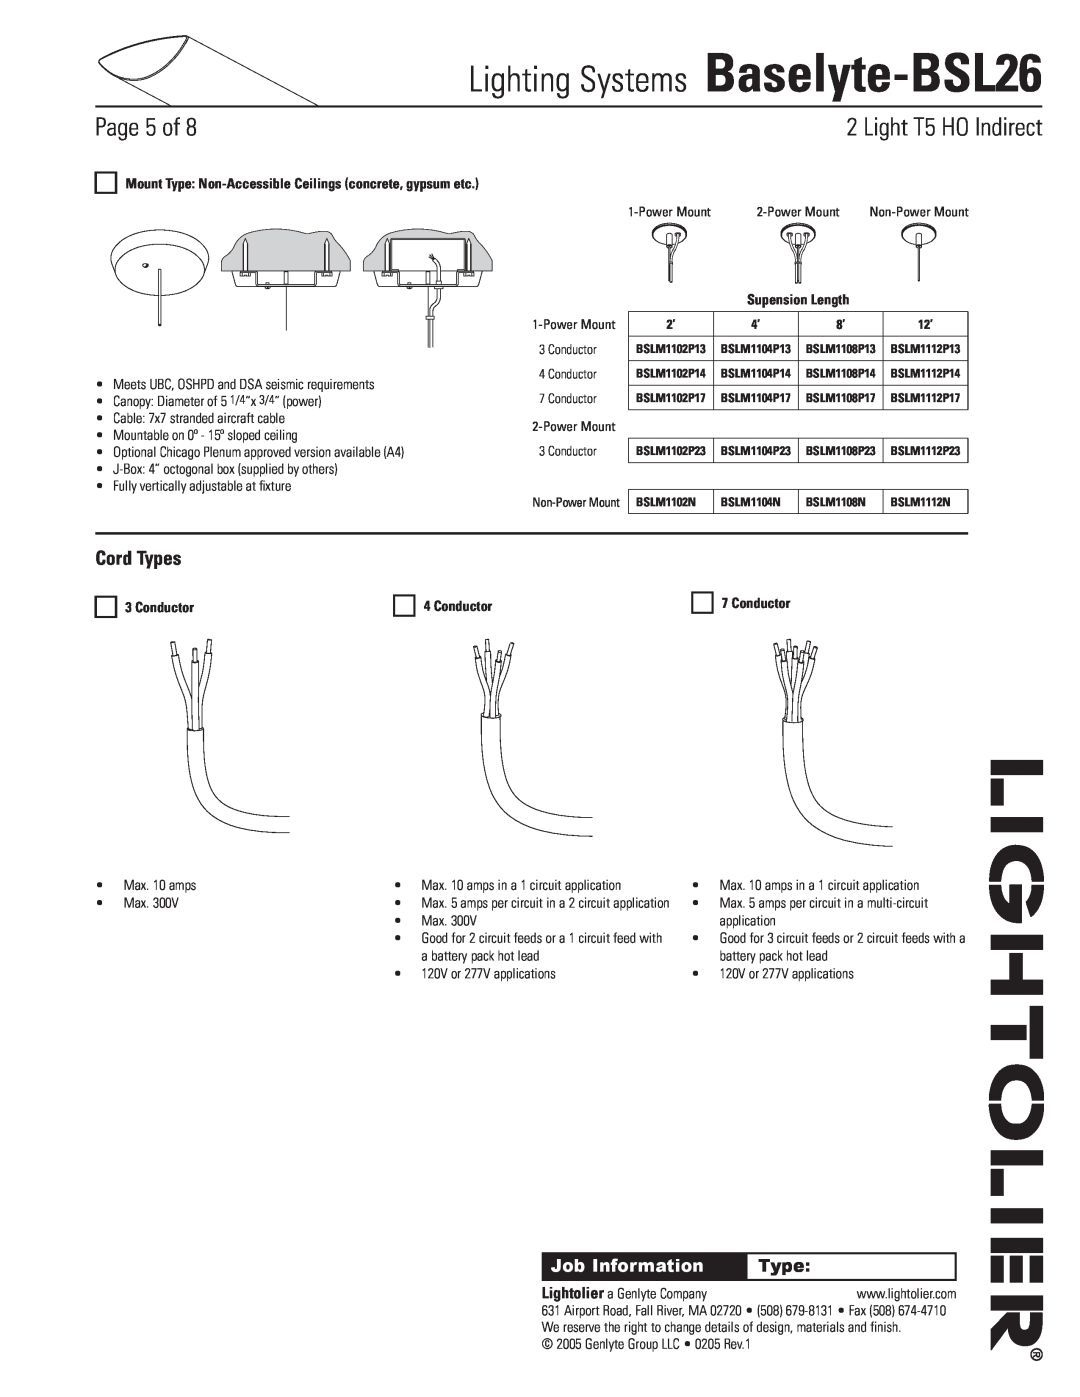 Lightolier Cord Types, Conductor, Lighting Systems Baselyte-BSL26, Page of, Light T5 HO Indirect, Job Information 